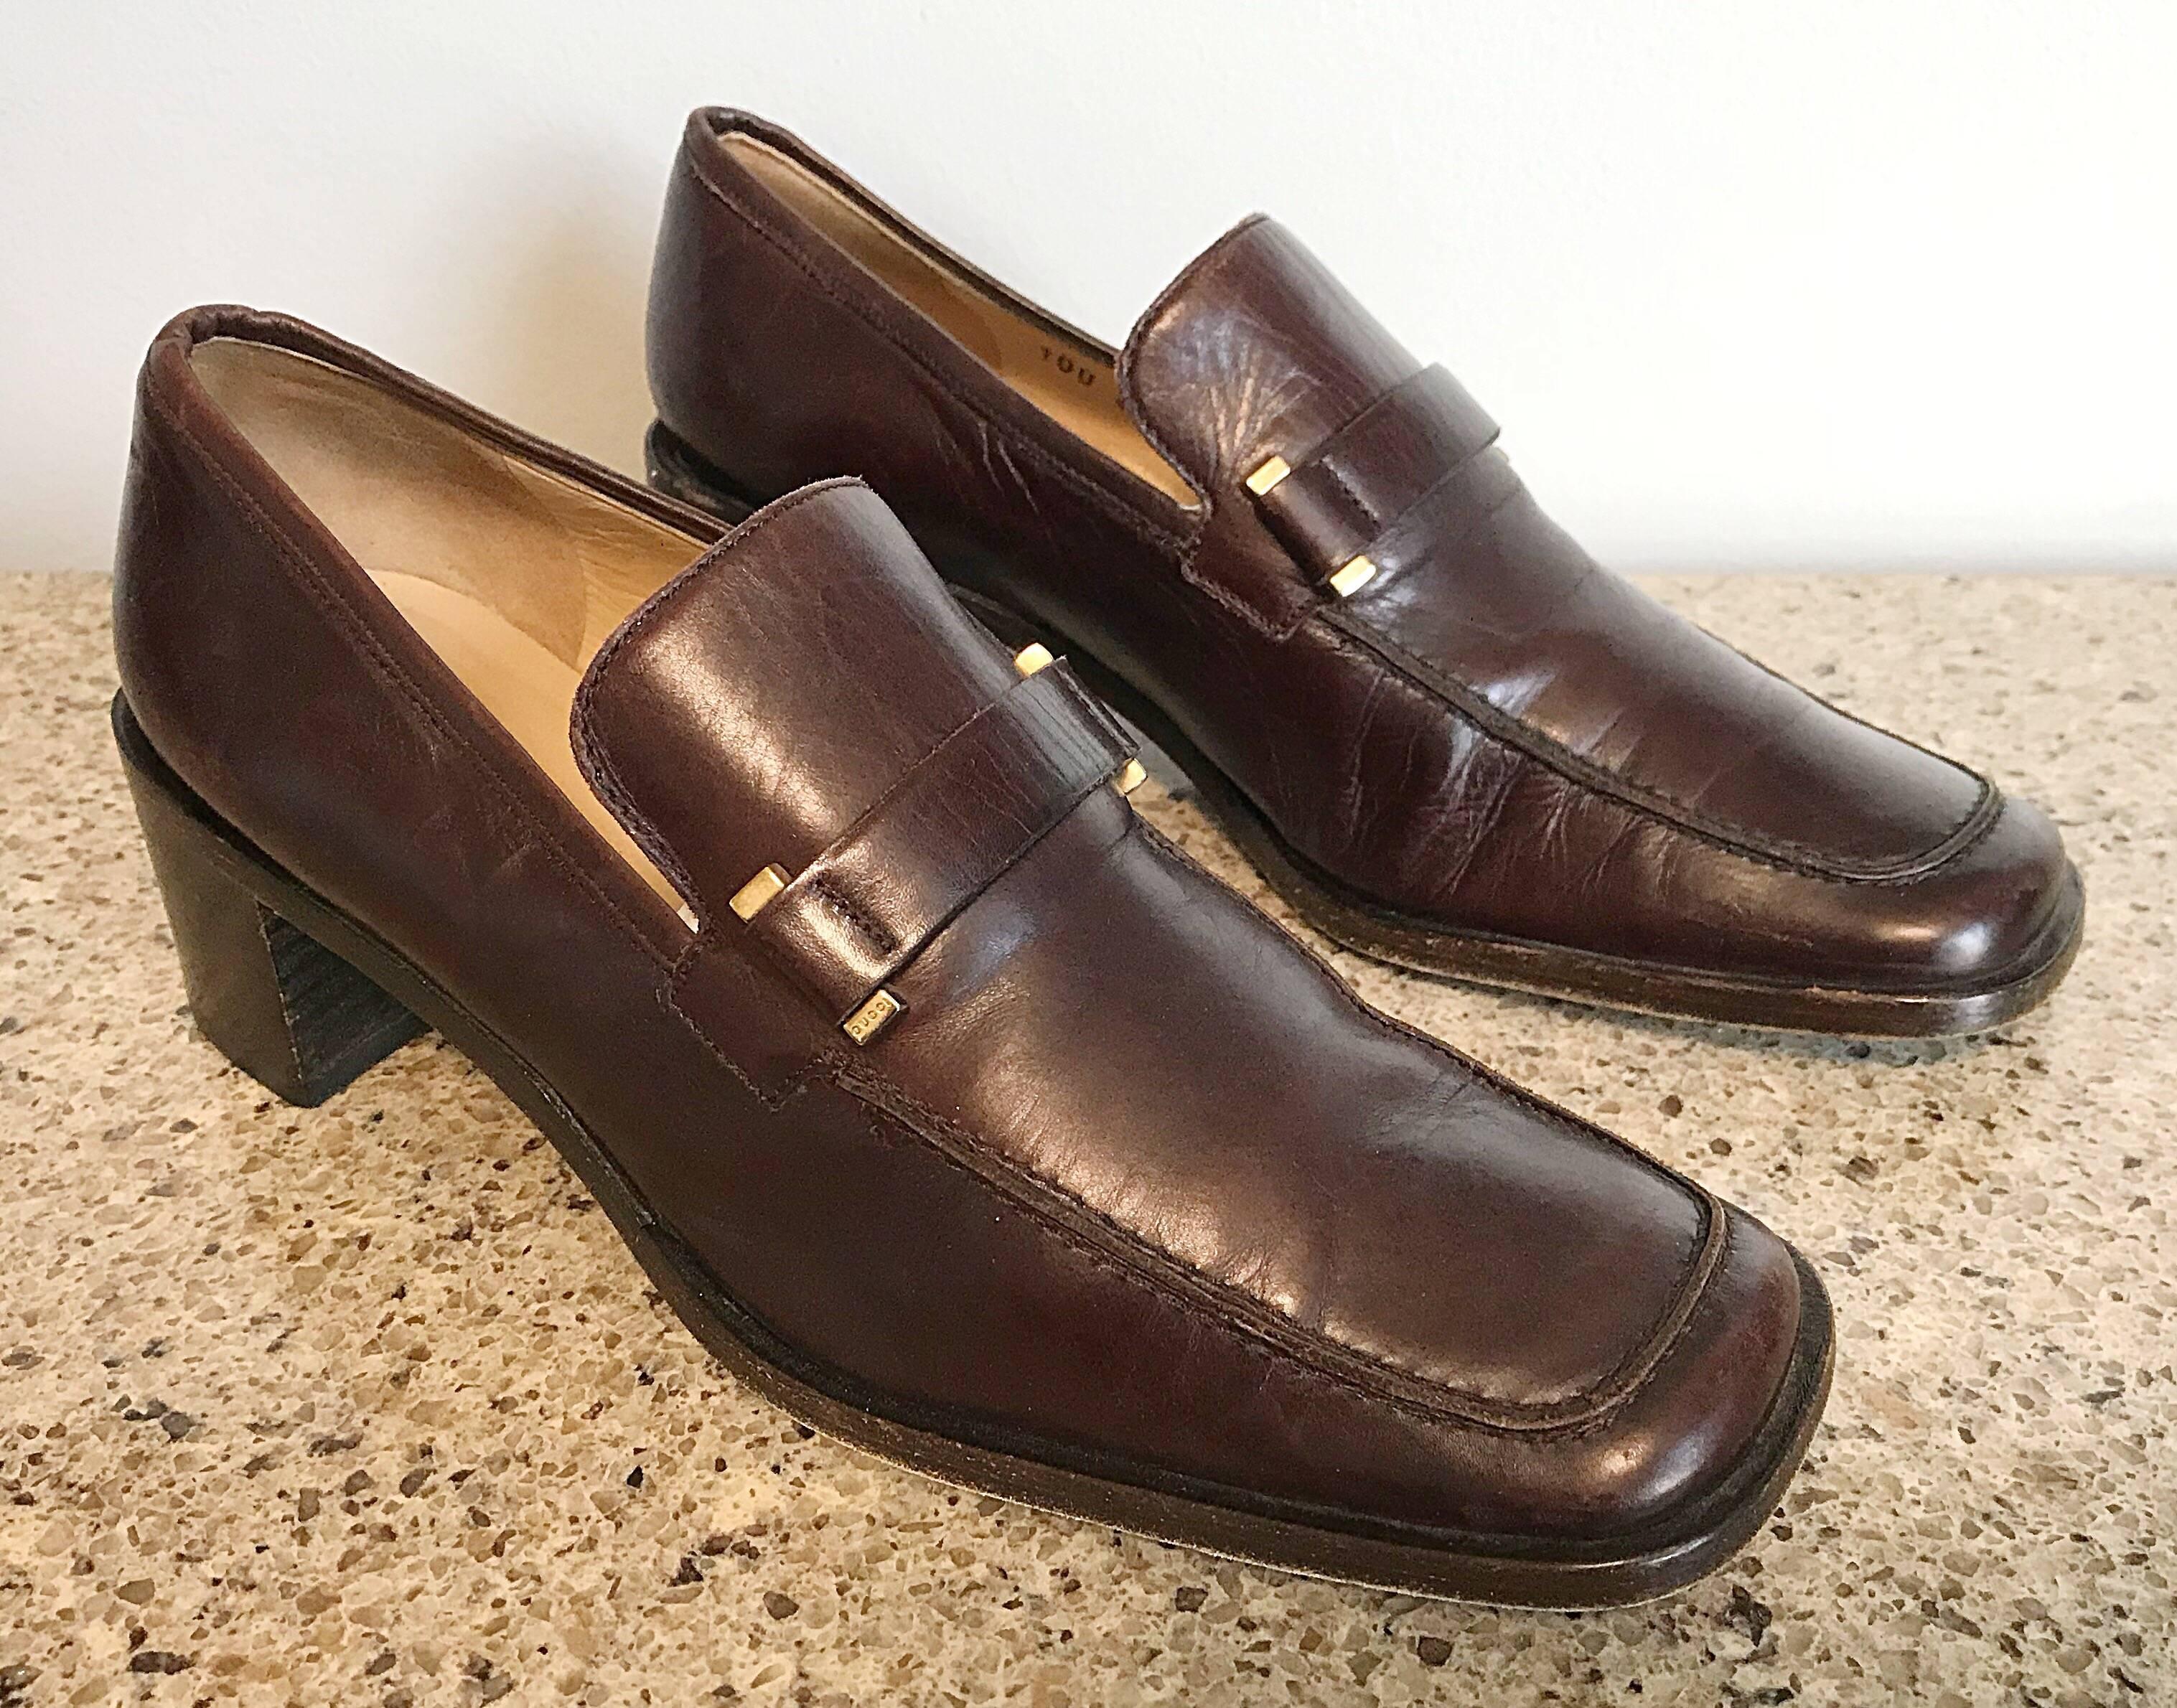 Classic pair of vintage Gucci leather stacked heel loafers from Tom Ford's first collection with Gucci in 1996! Rich chocolate color pairs nicely with nearly everything. Brass hardware. These 90s gems can easily be dressed up or down. Great with